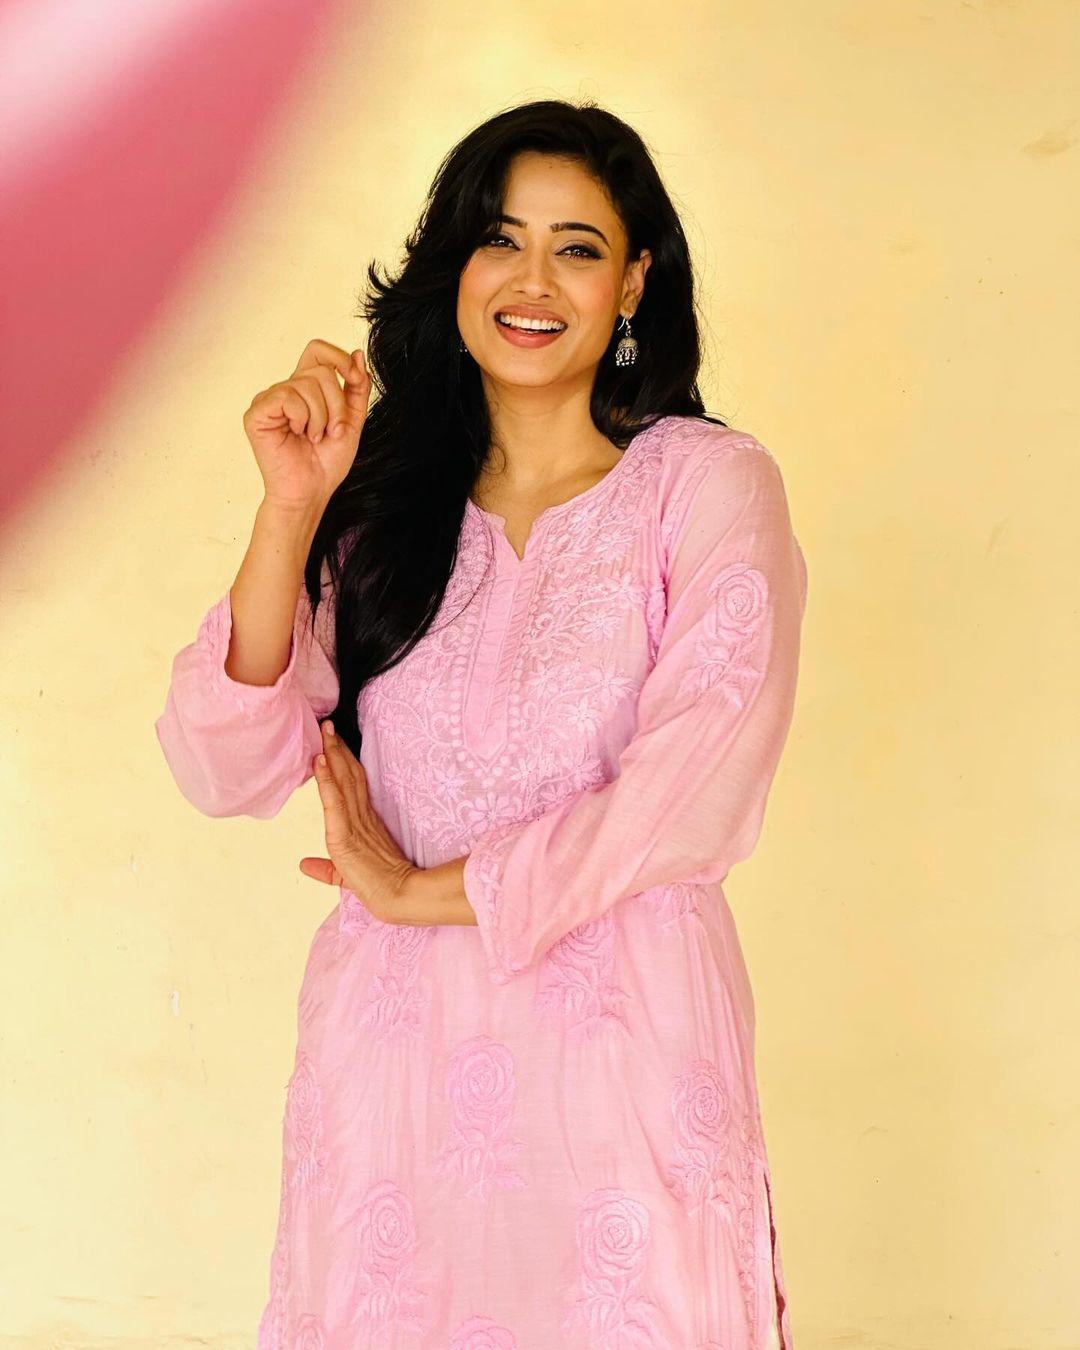 Shweta Tiwari gave us a perfect example of how to ace your look minimally. Shweta wore a lilac chikankari suit and added small jhumkas to enhance the look